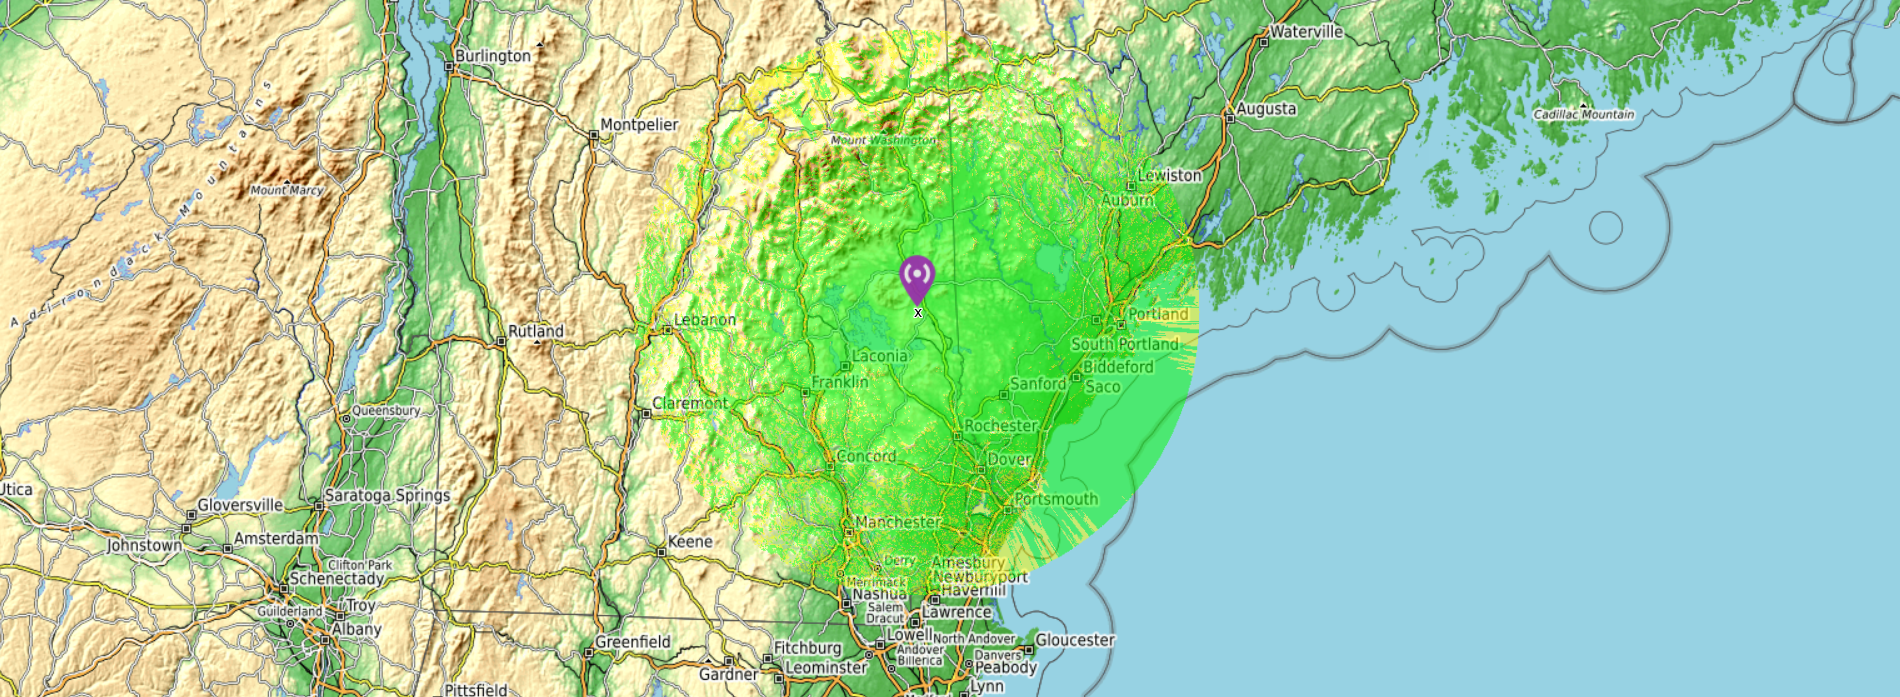 51.64 mhz rf coverage map